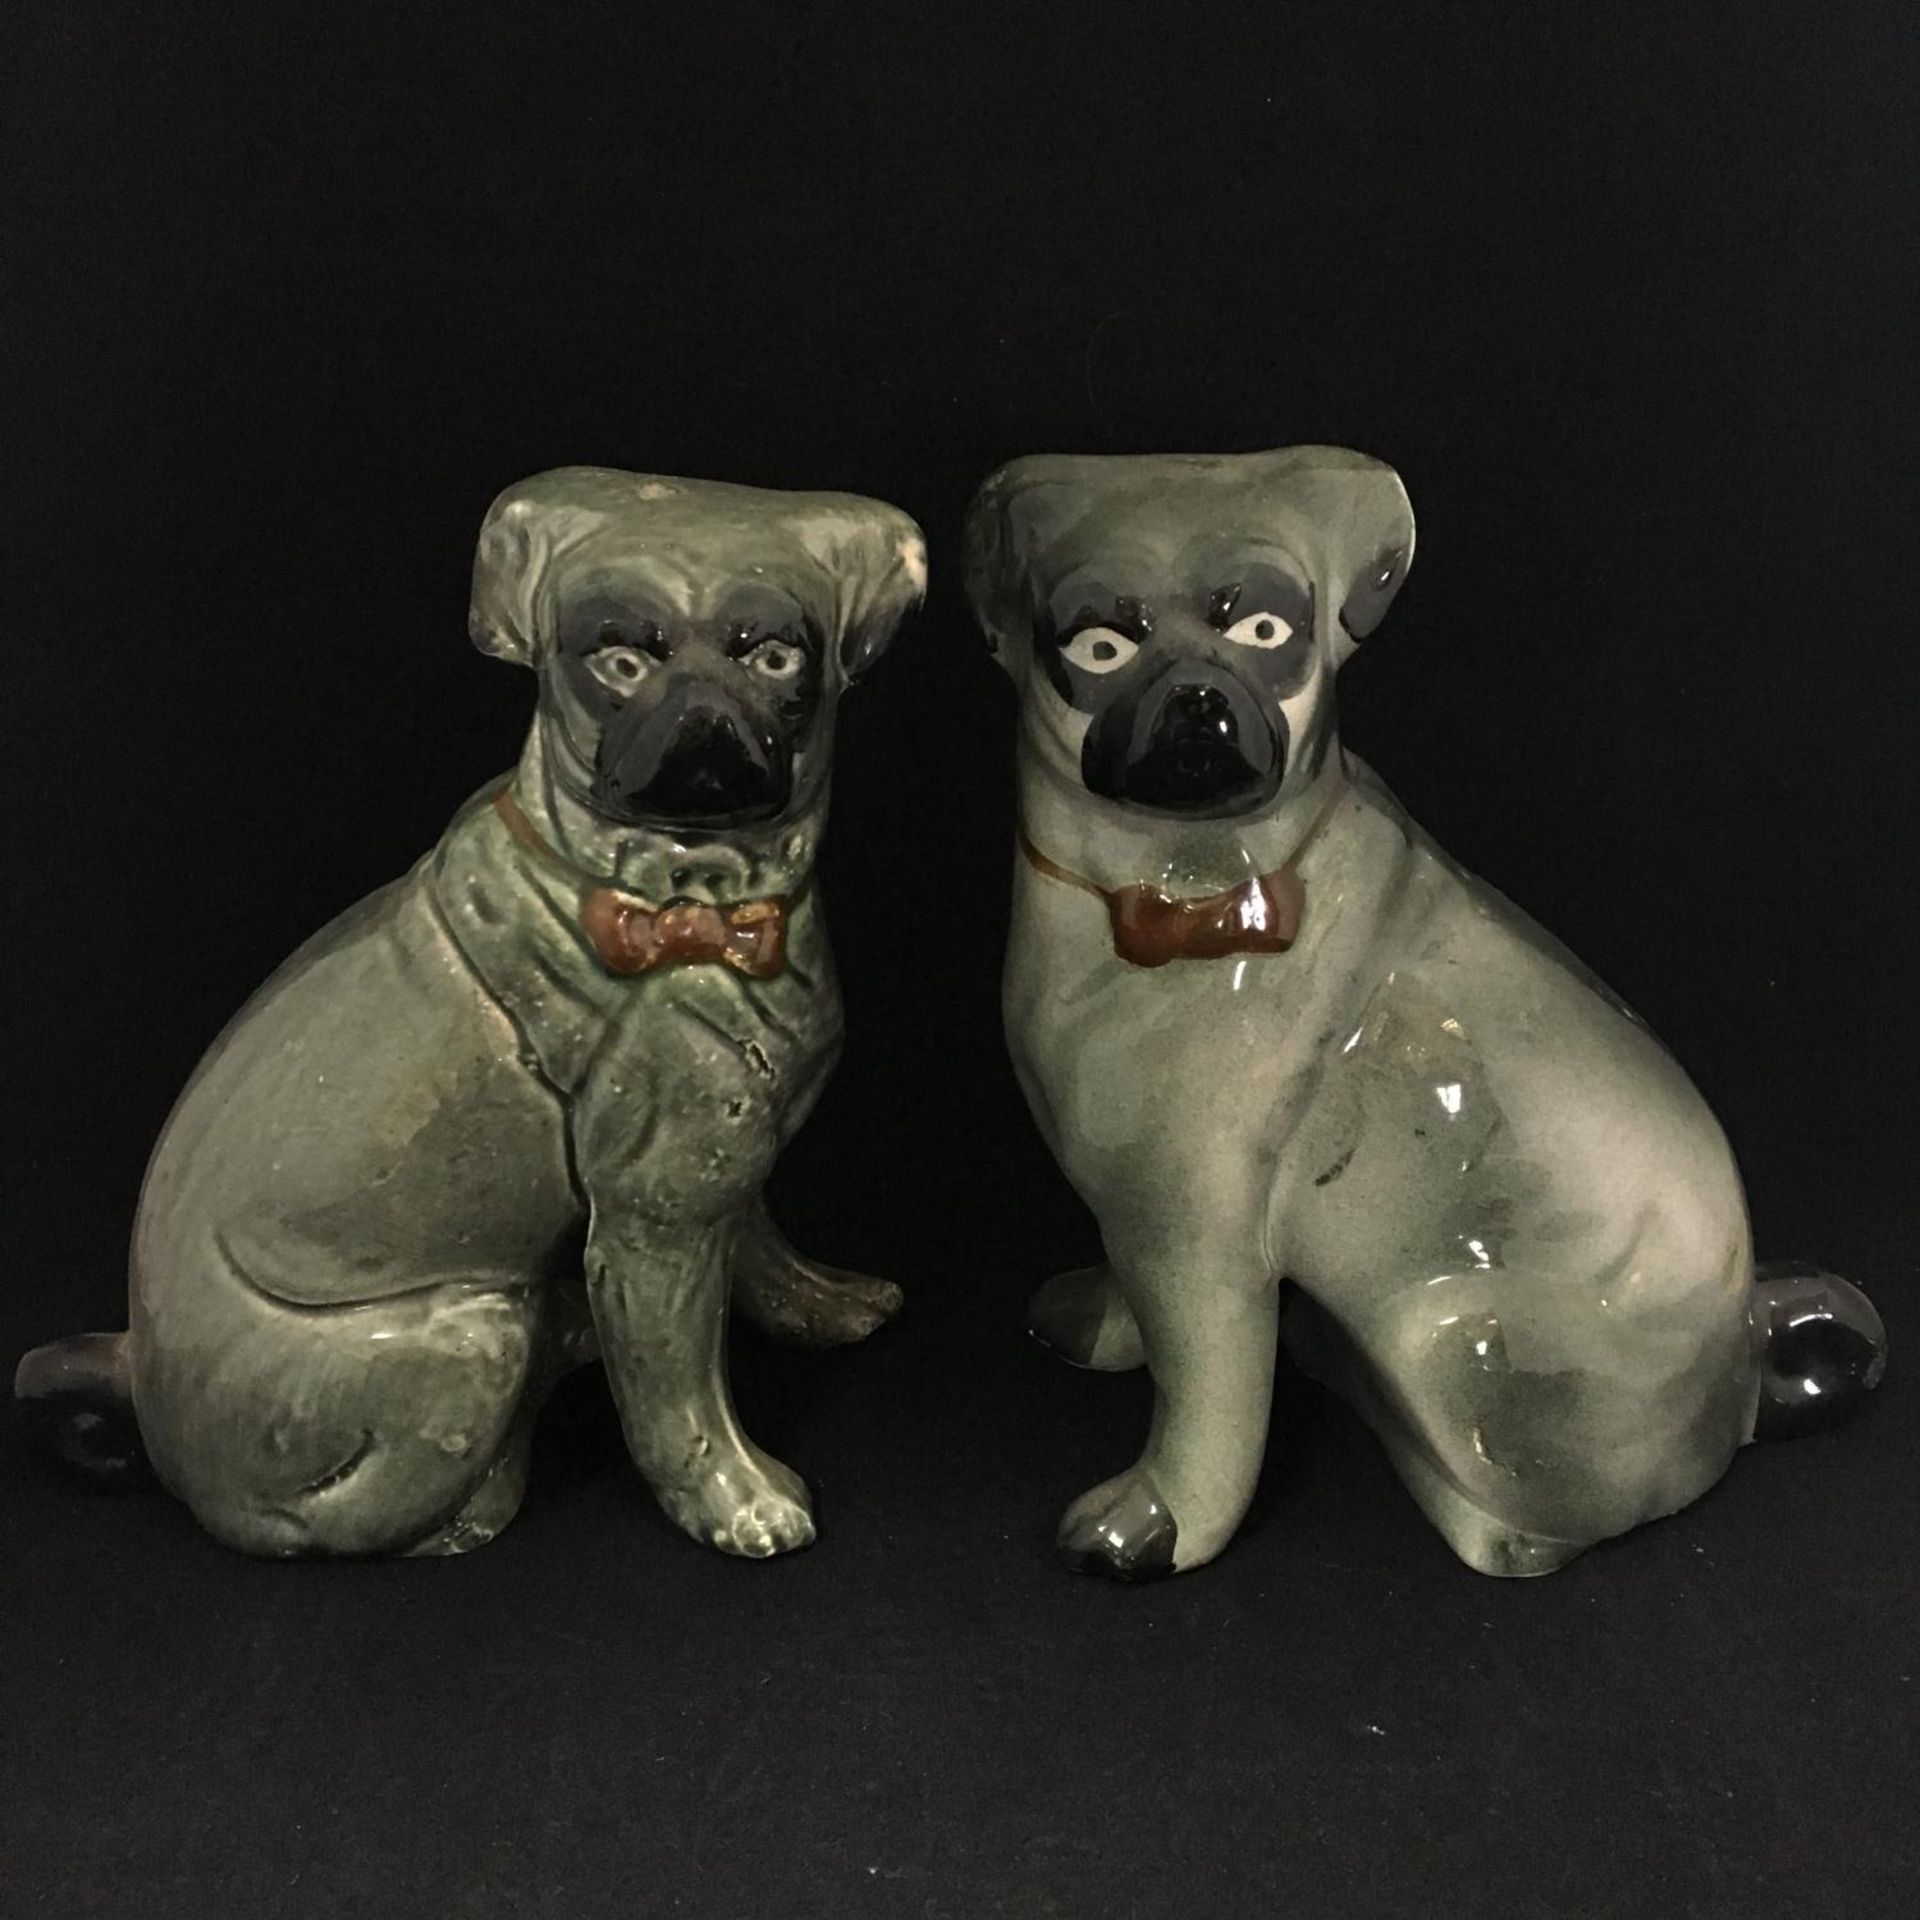 Antique Victorian era ceramic seated pugs. Matched (not an exact pair). Standing around 20cm high.